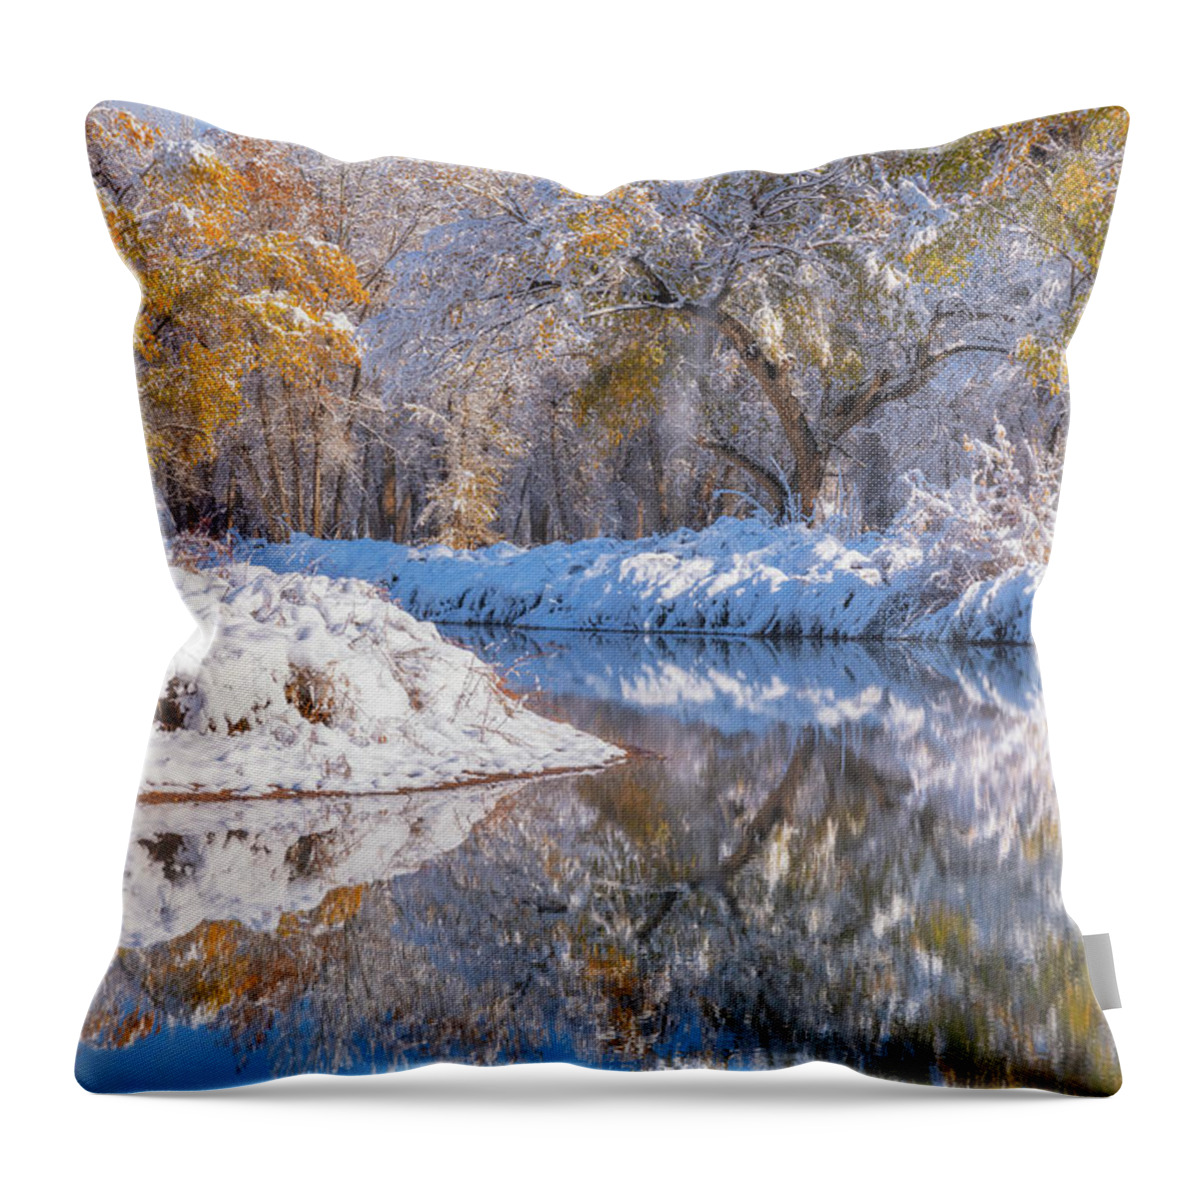 Snow Throw Pillow featuring the photograph Angel Dusting by Darren White